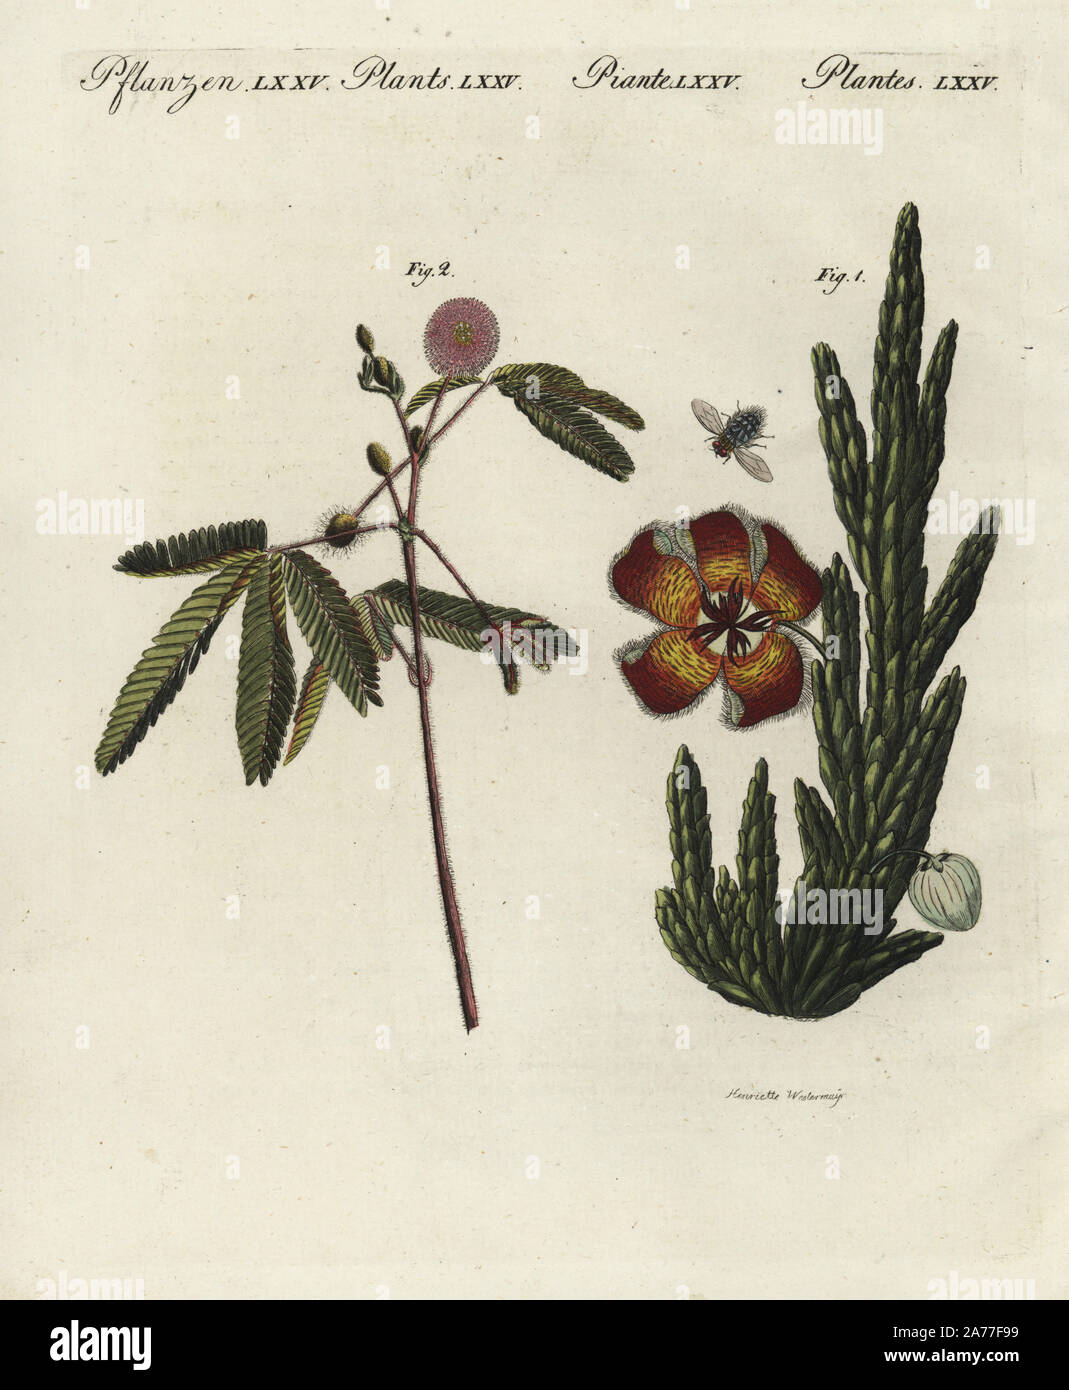 Hairy stapelia, Stapelia hirsuta 1, and sensitive plant, Mimosa pudica 2. Handcoloured copperplate engraving after Henriette Dorothea  Westermayr from Friedrich Johann Bertuch's Bilderbuch fur Kinder (Picture Book for Children), Weimar, 1798. Stock Photo